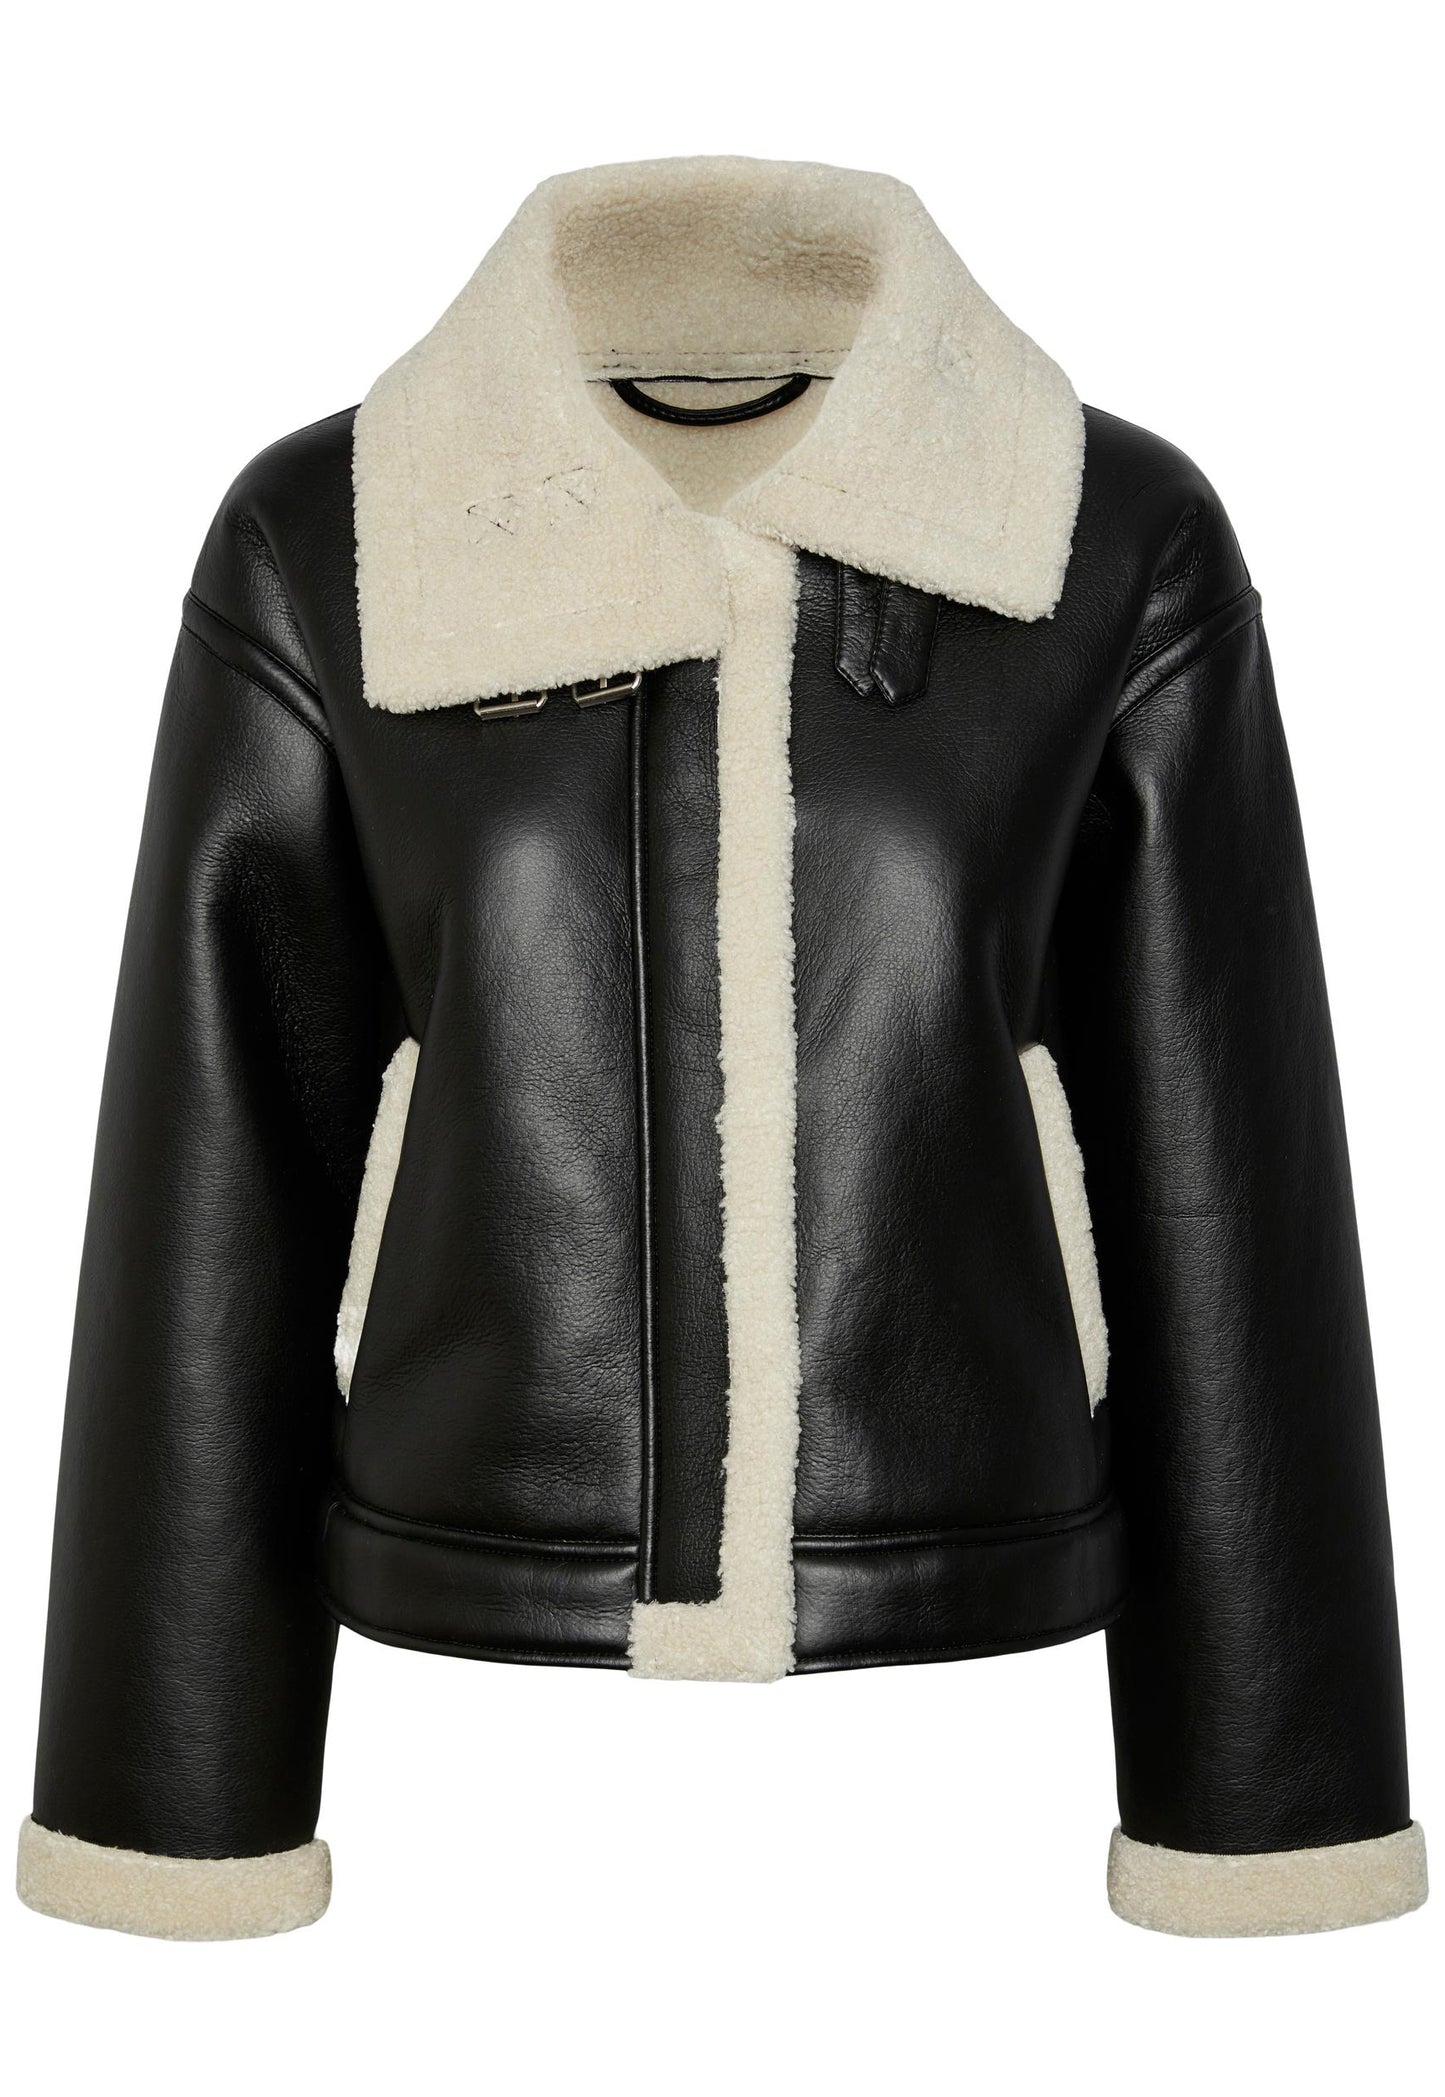 PIECES Janelle Faux Leather & Shearling Aviator Coat in Black & Cream - One Nation Clothing